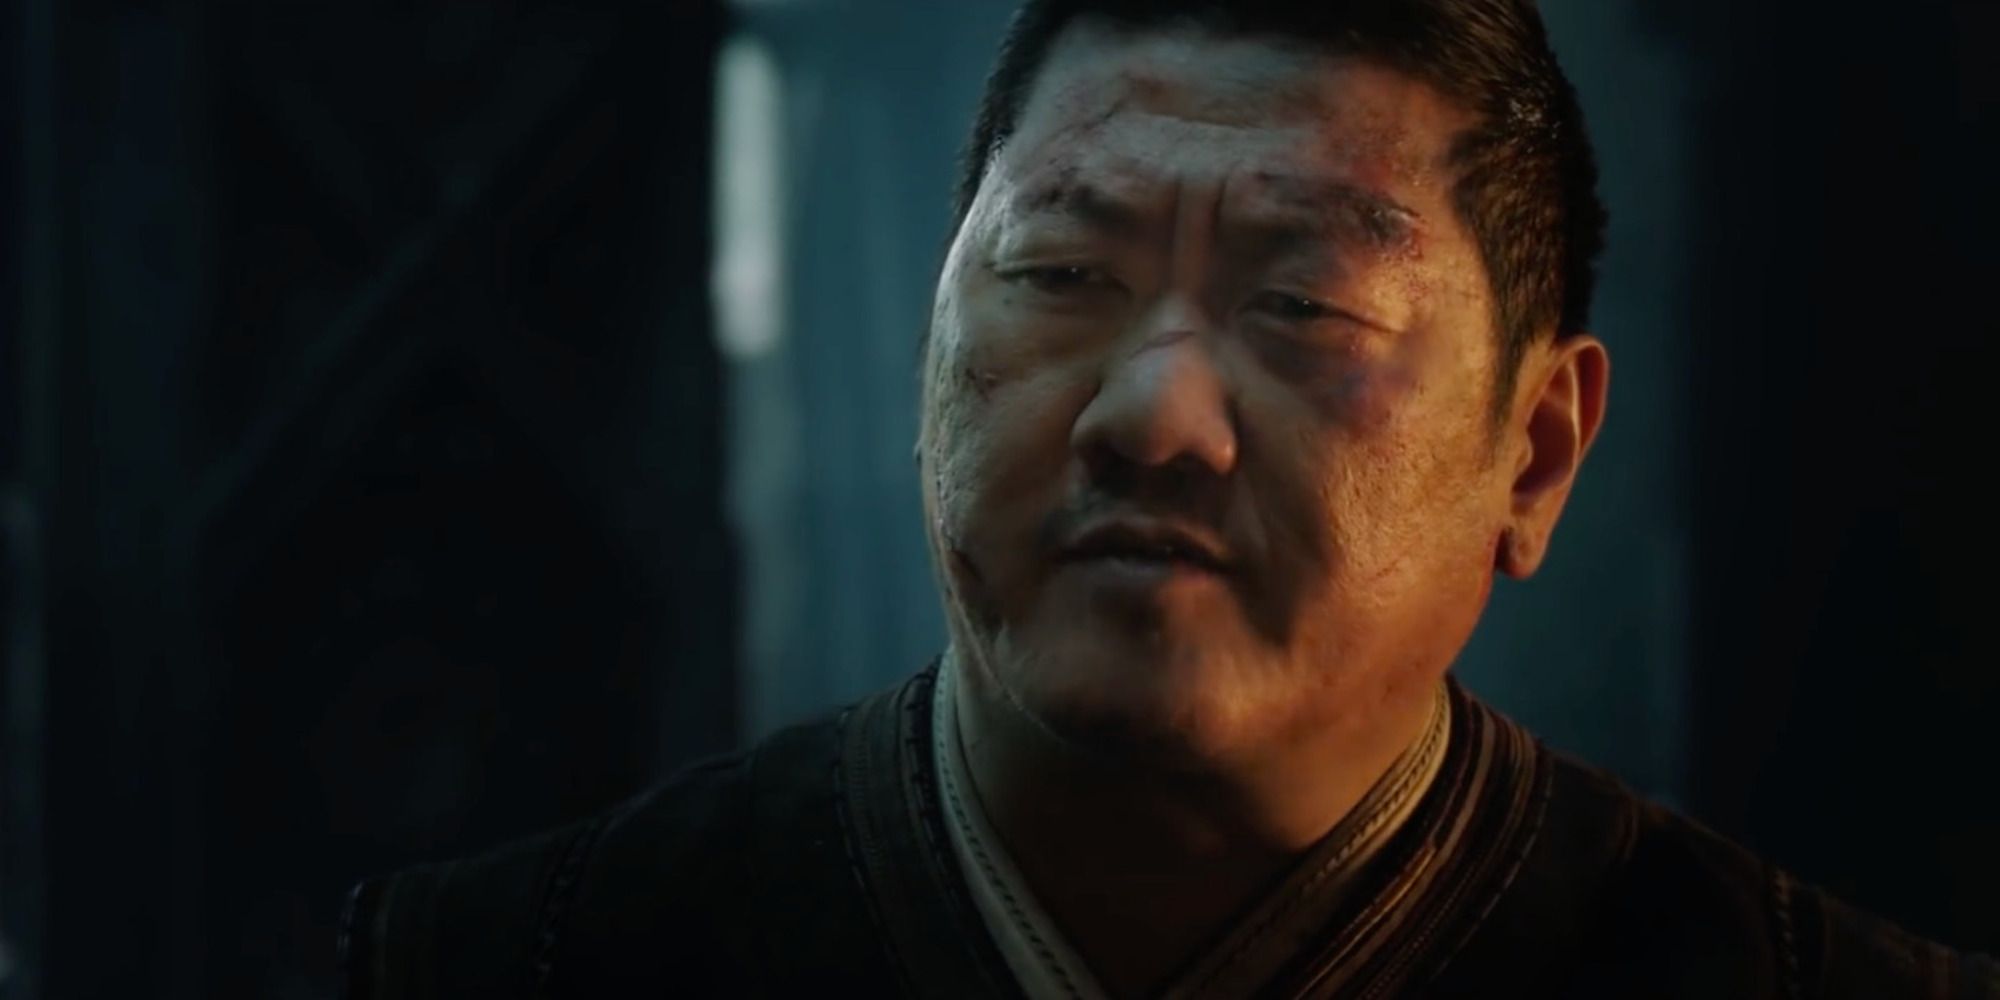 Wong from Doctor Strange in the Multiverse of Madness